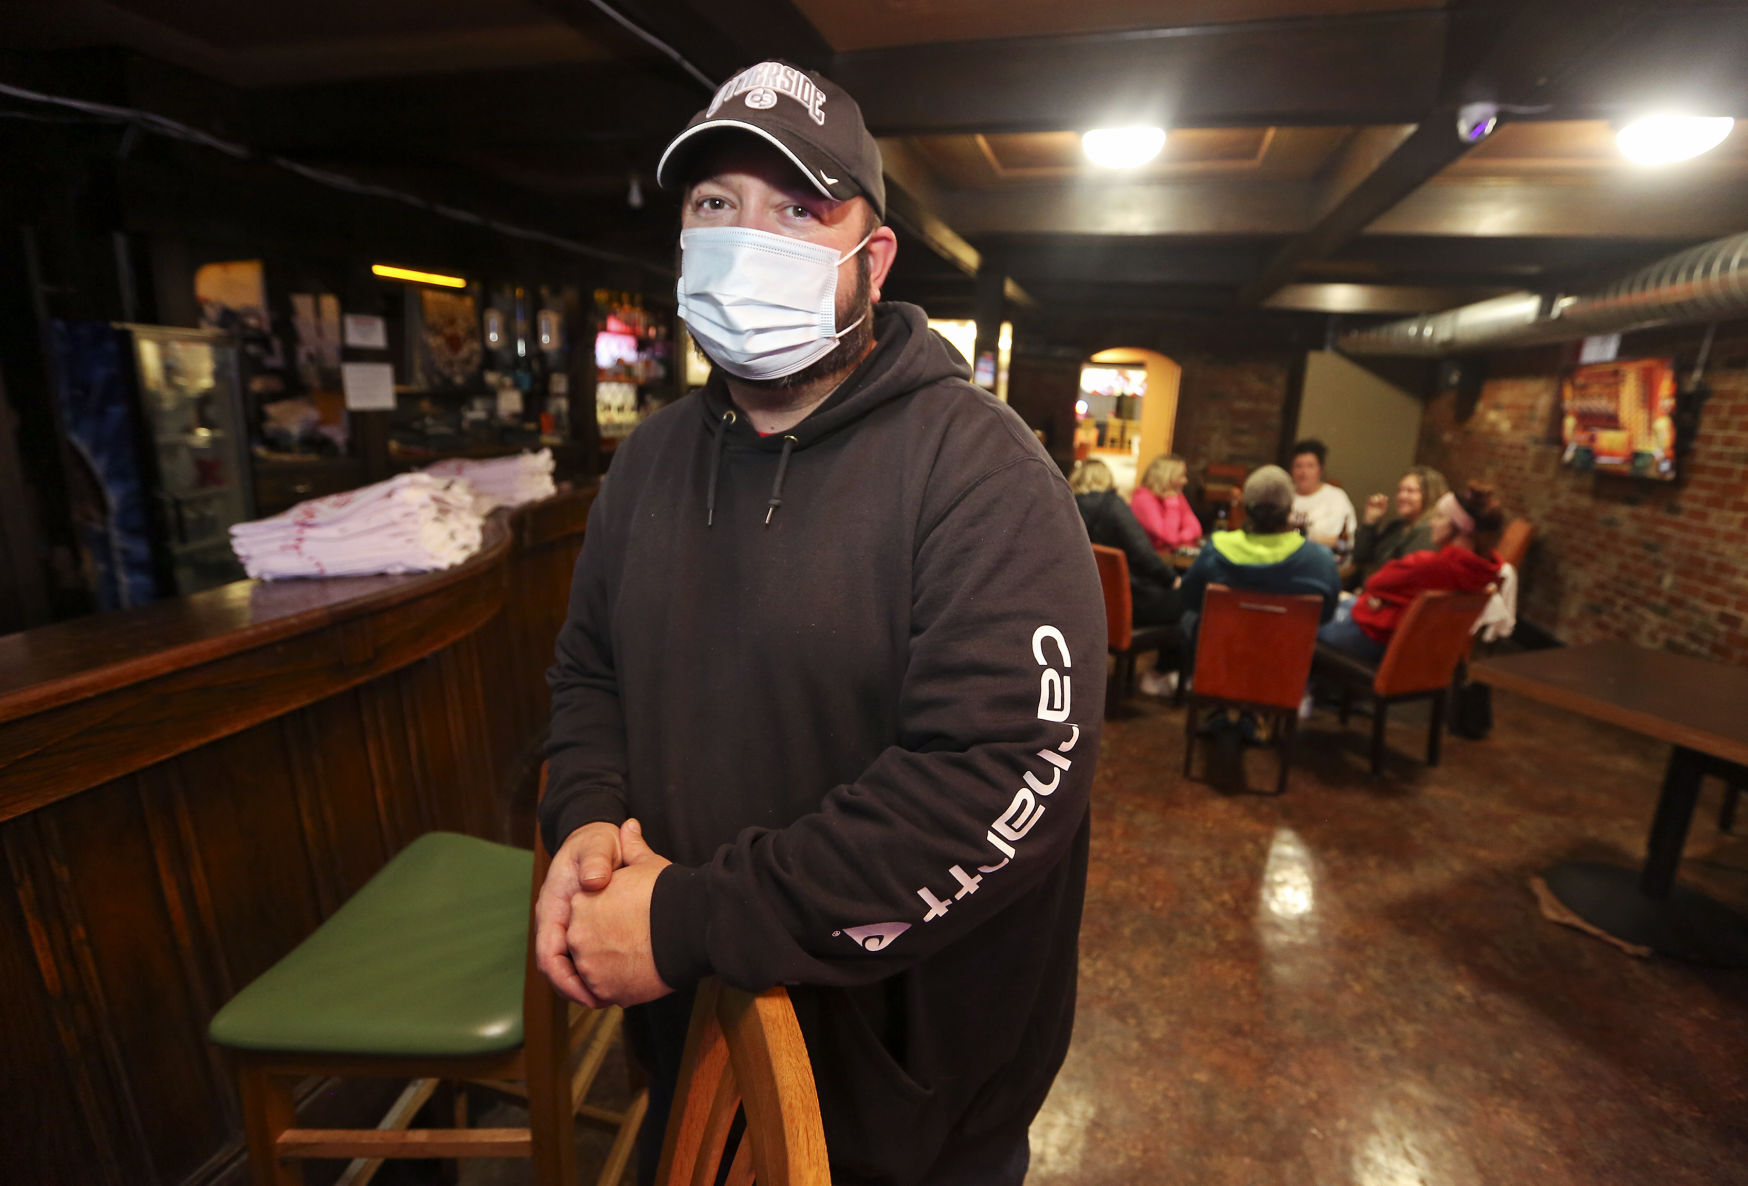 Mike Meyer, owner of the The Other Side in East Dubuque, Ill., on Tuesday, Jan. 19, 2021. Jo Daviess County has moved to Tier 1 mitigation, allowing for indoor dining and small gatherings. PHOTO CREDIT: NICKI KOHL